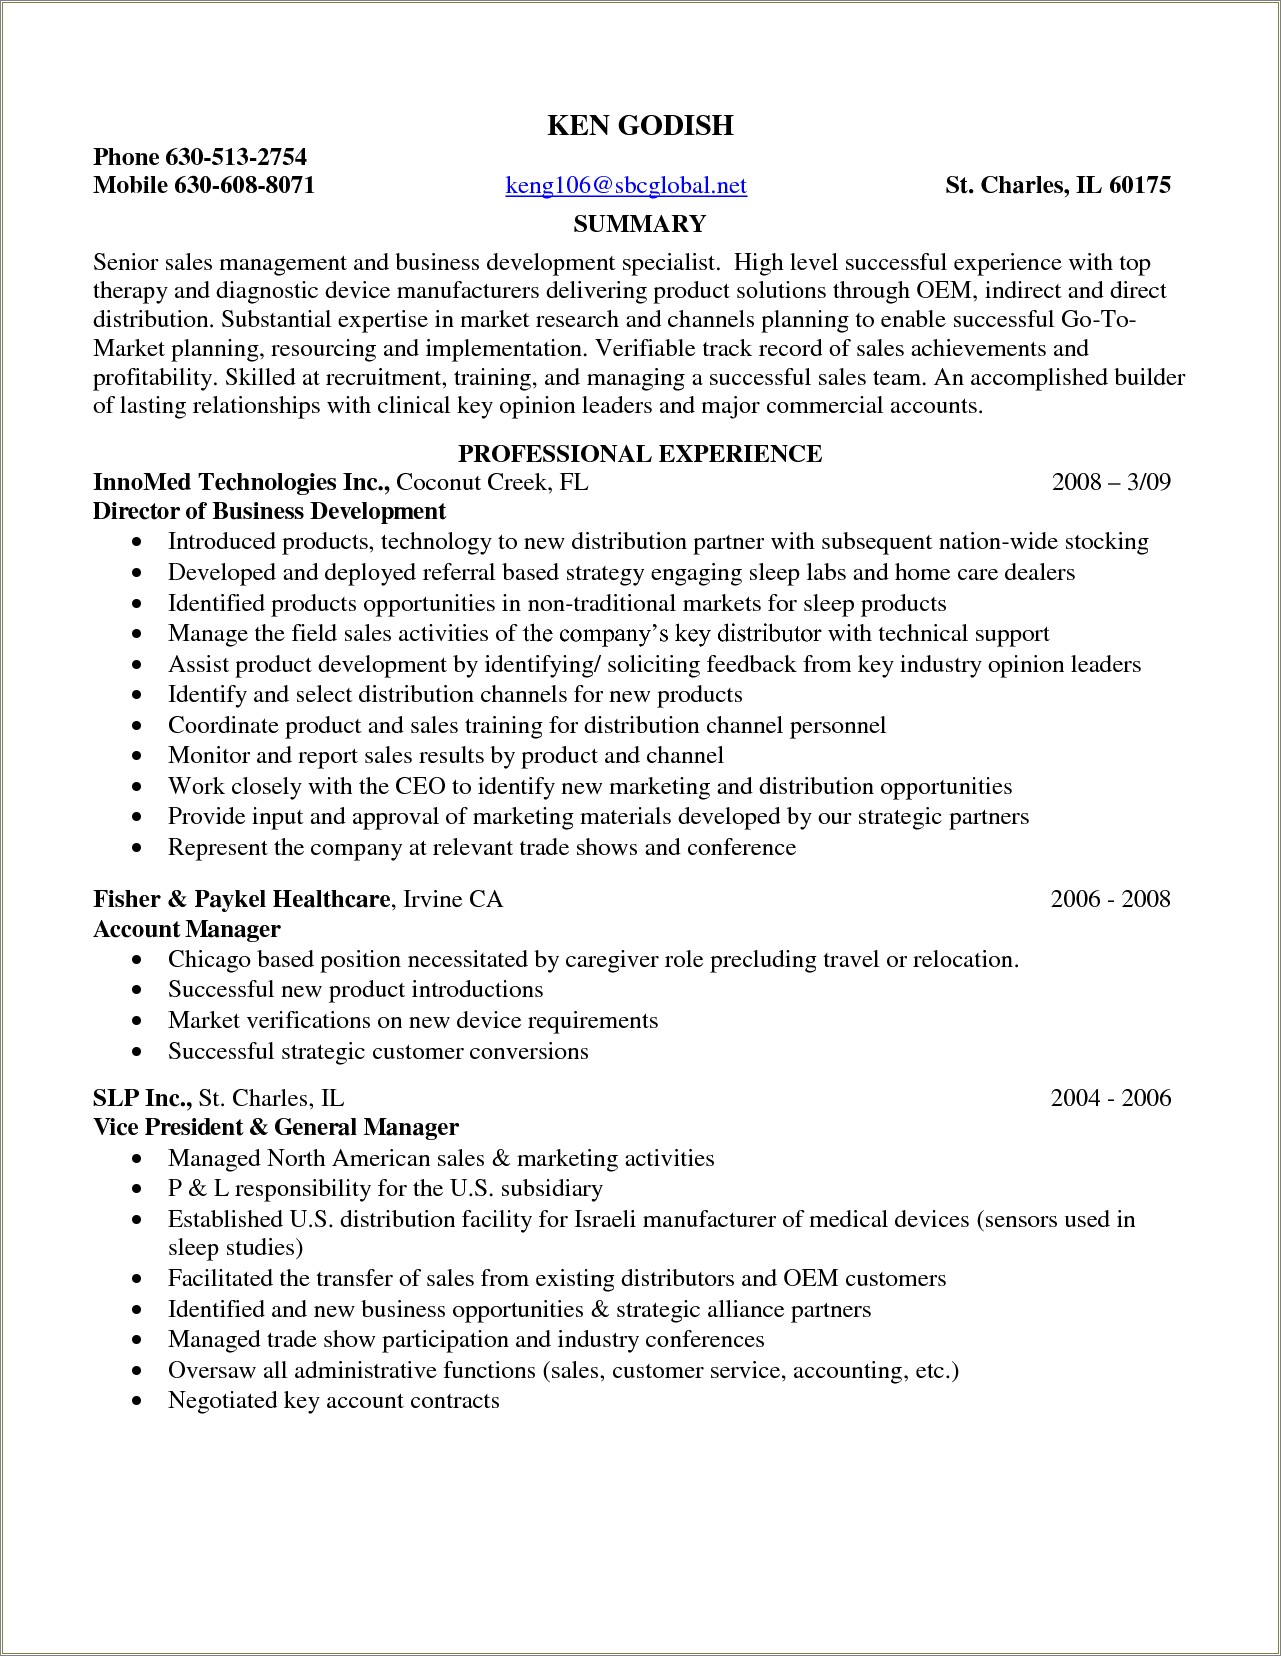 Pharmaceutical Sales Resume Examples Entry Level